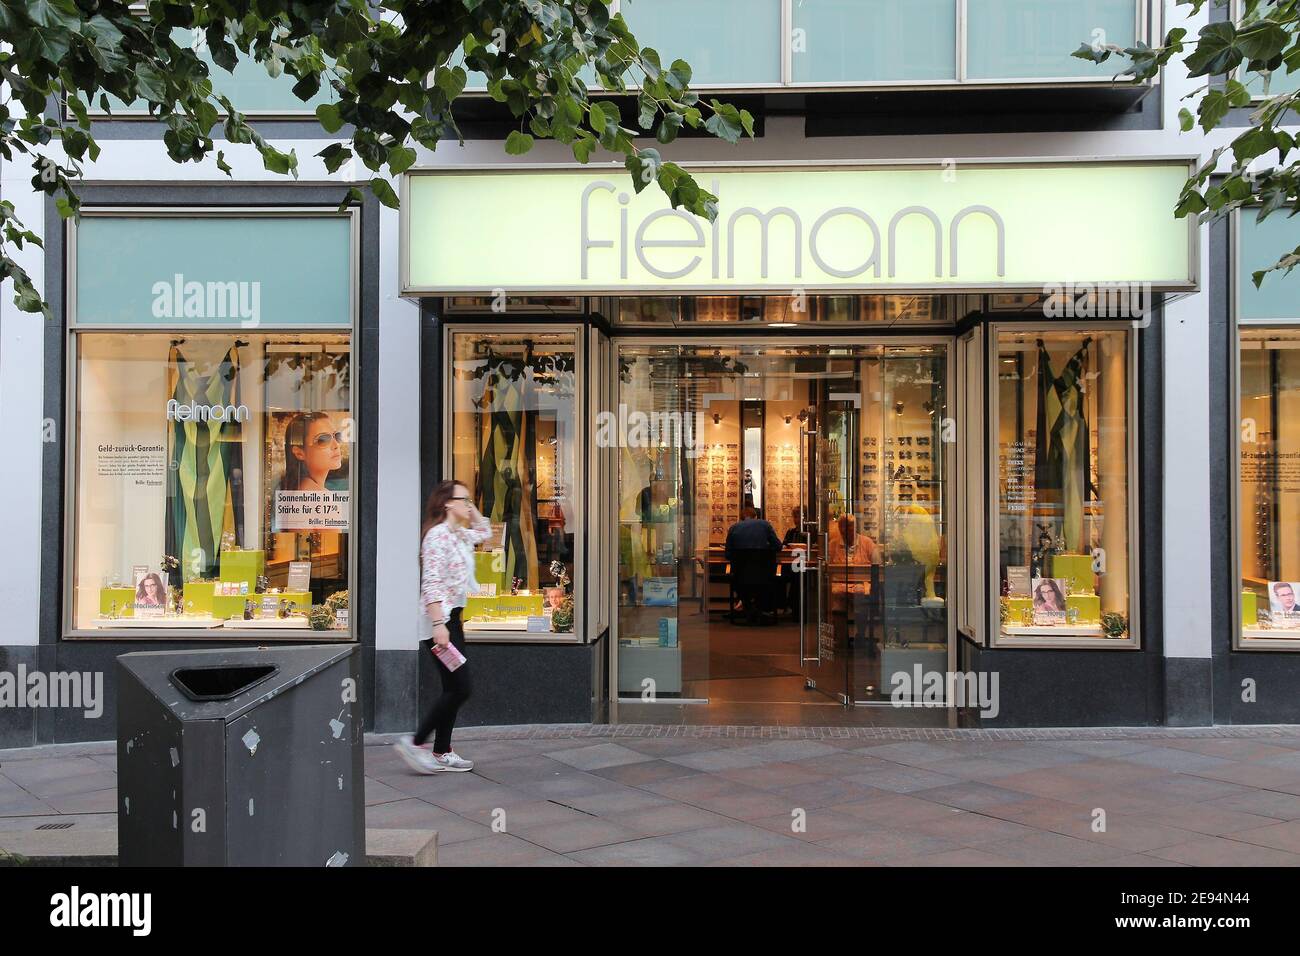 LUBECK, GERMANY - AUGUST 29, 2014: Fielmann eyeglasses store in Lubeck, Germany. Fielmann is a German eye-wear company with over 700 stores. Stock Photo